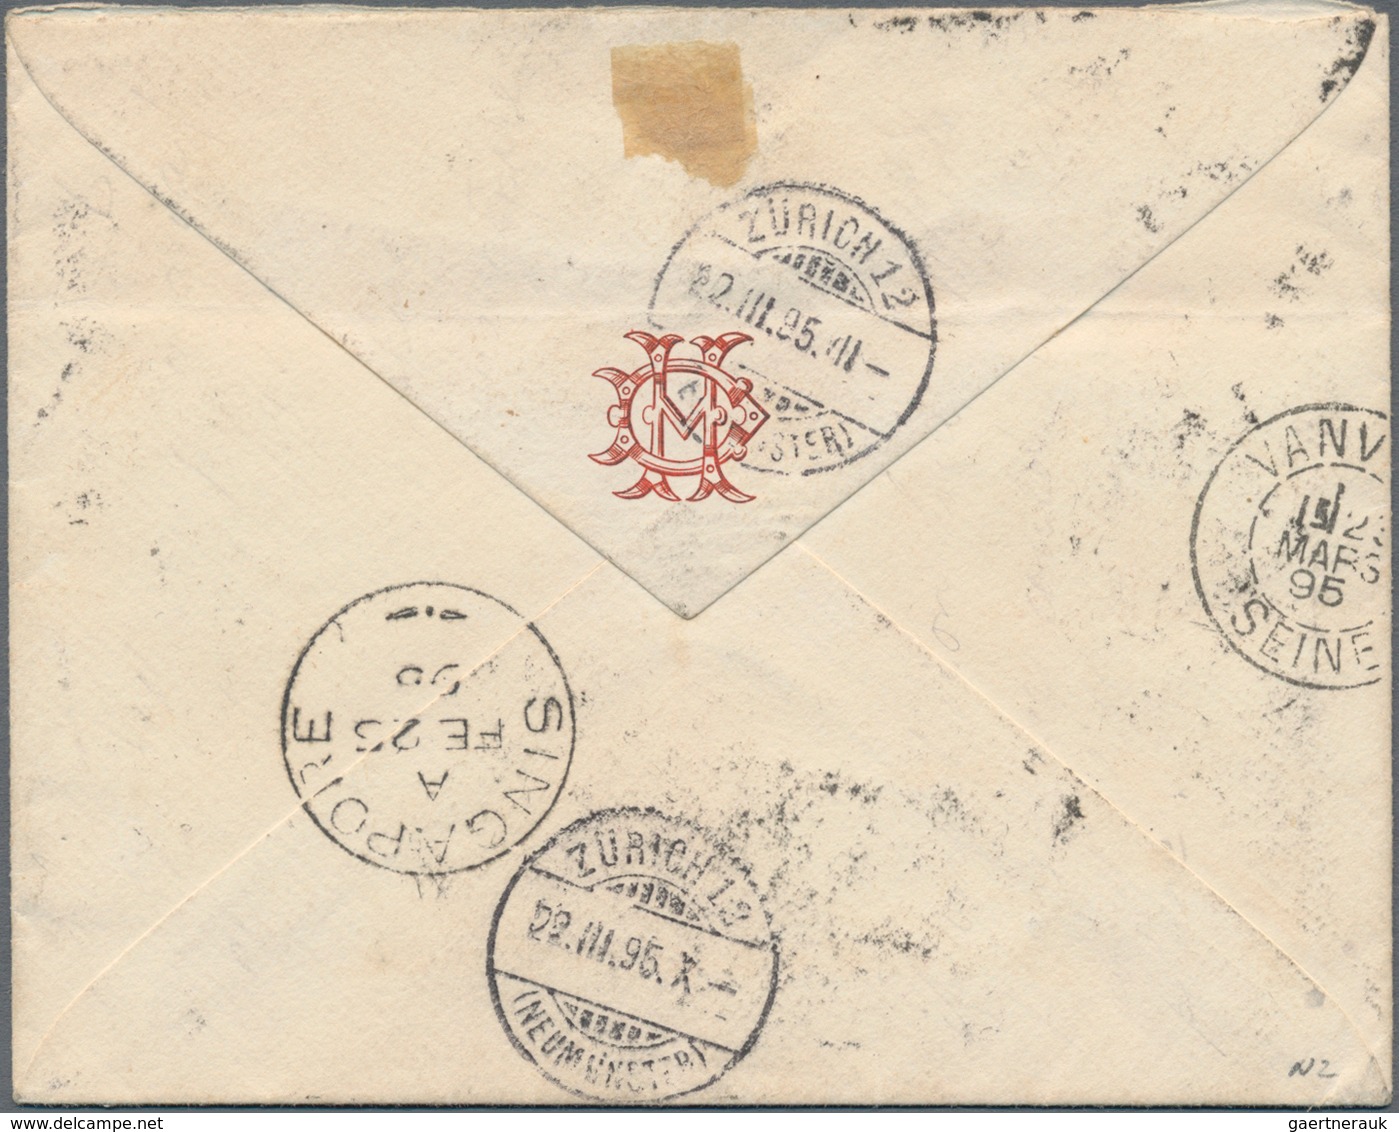 Malaiische Staaten - Straits Settlements: 1895, 8c. Orange On Cover From "PENANG FE 23 95" To Zurich - Straits Settlements